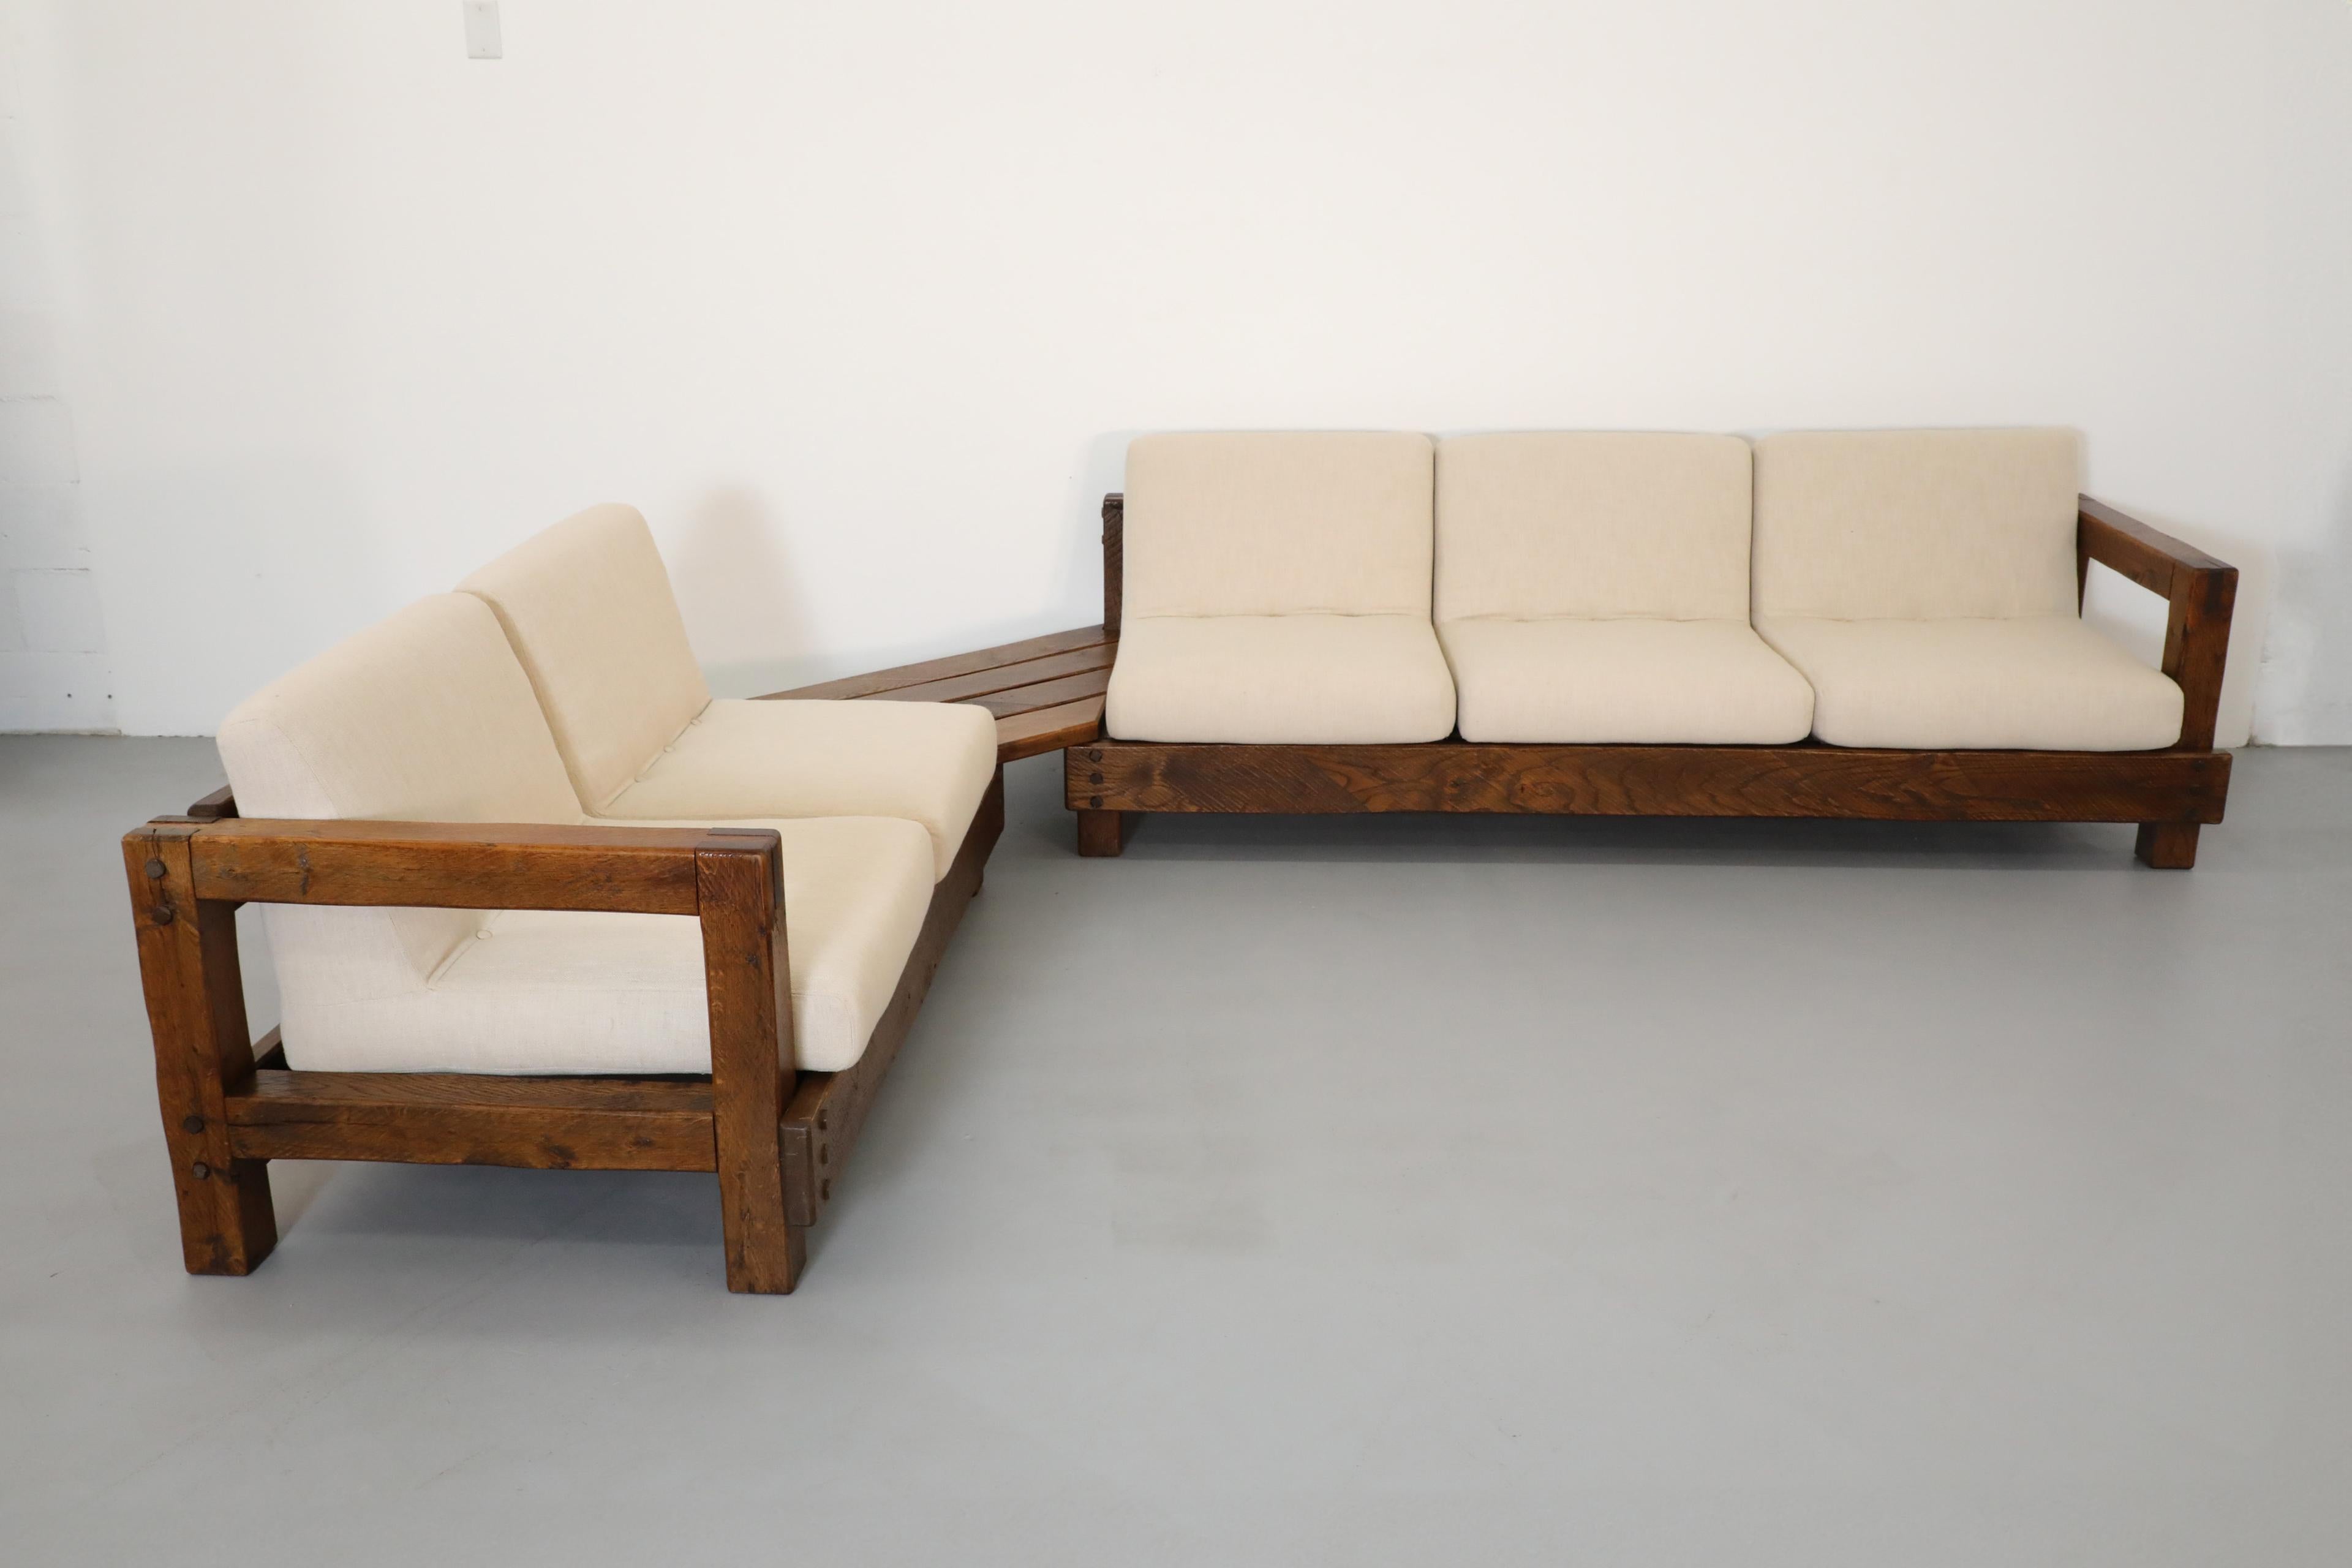 Pierre Chapo Inspired Oak Brutalist Sectional Sofa w/ Built In Corner Table In Good Condition For Sale In Los Angeles, CA